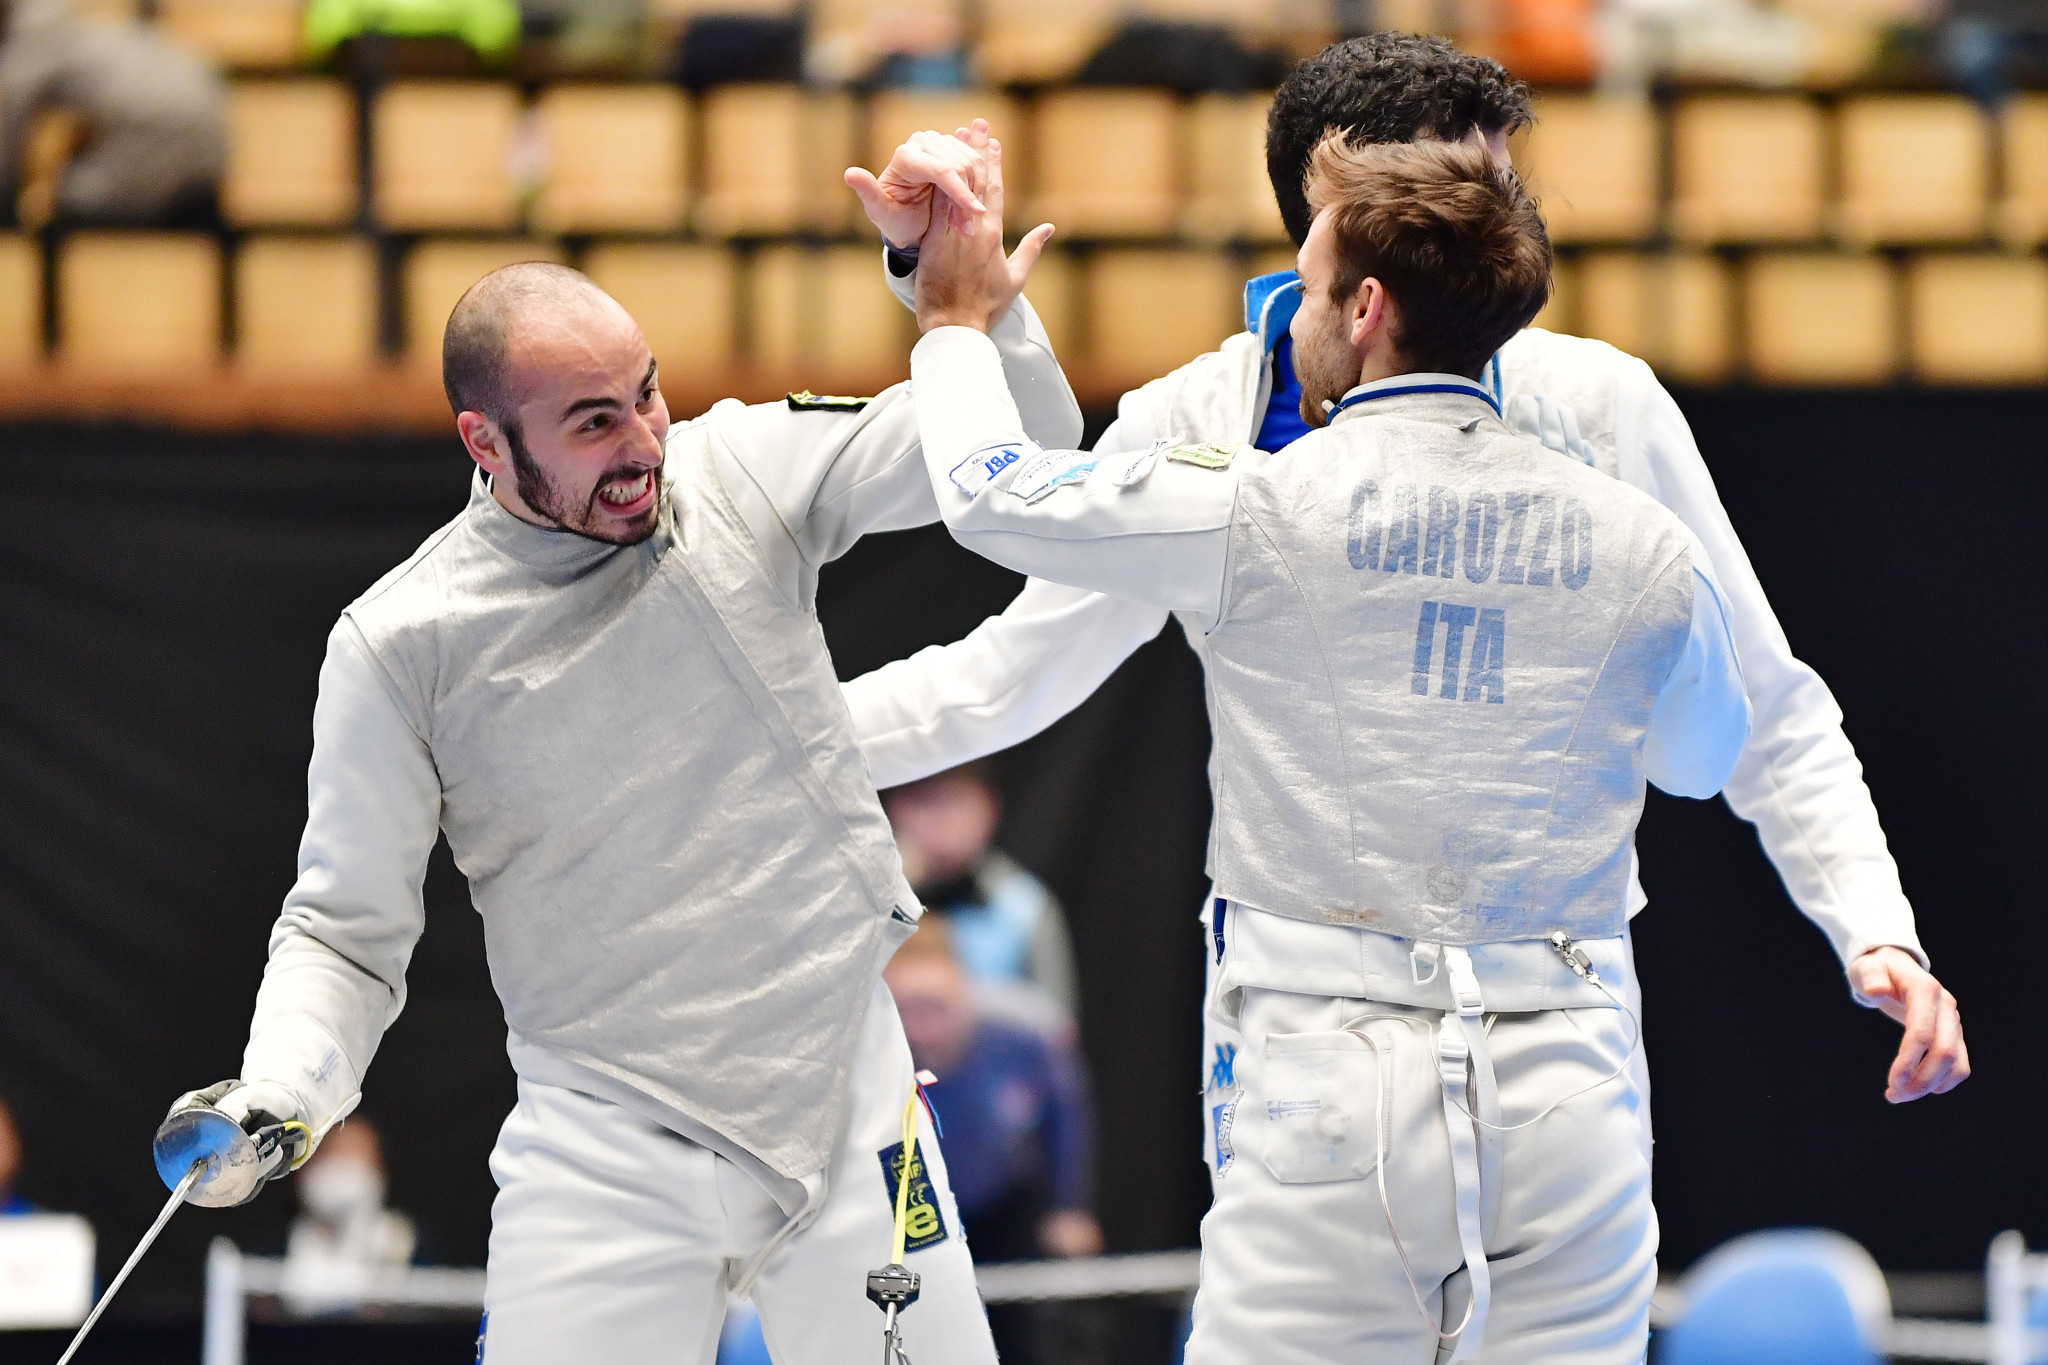 Italy triumph in team event at FIE Sabre World Cup in Madrid 